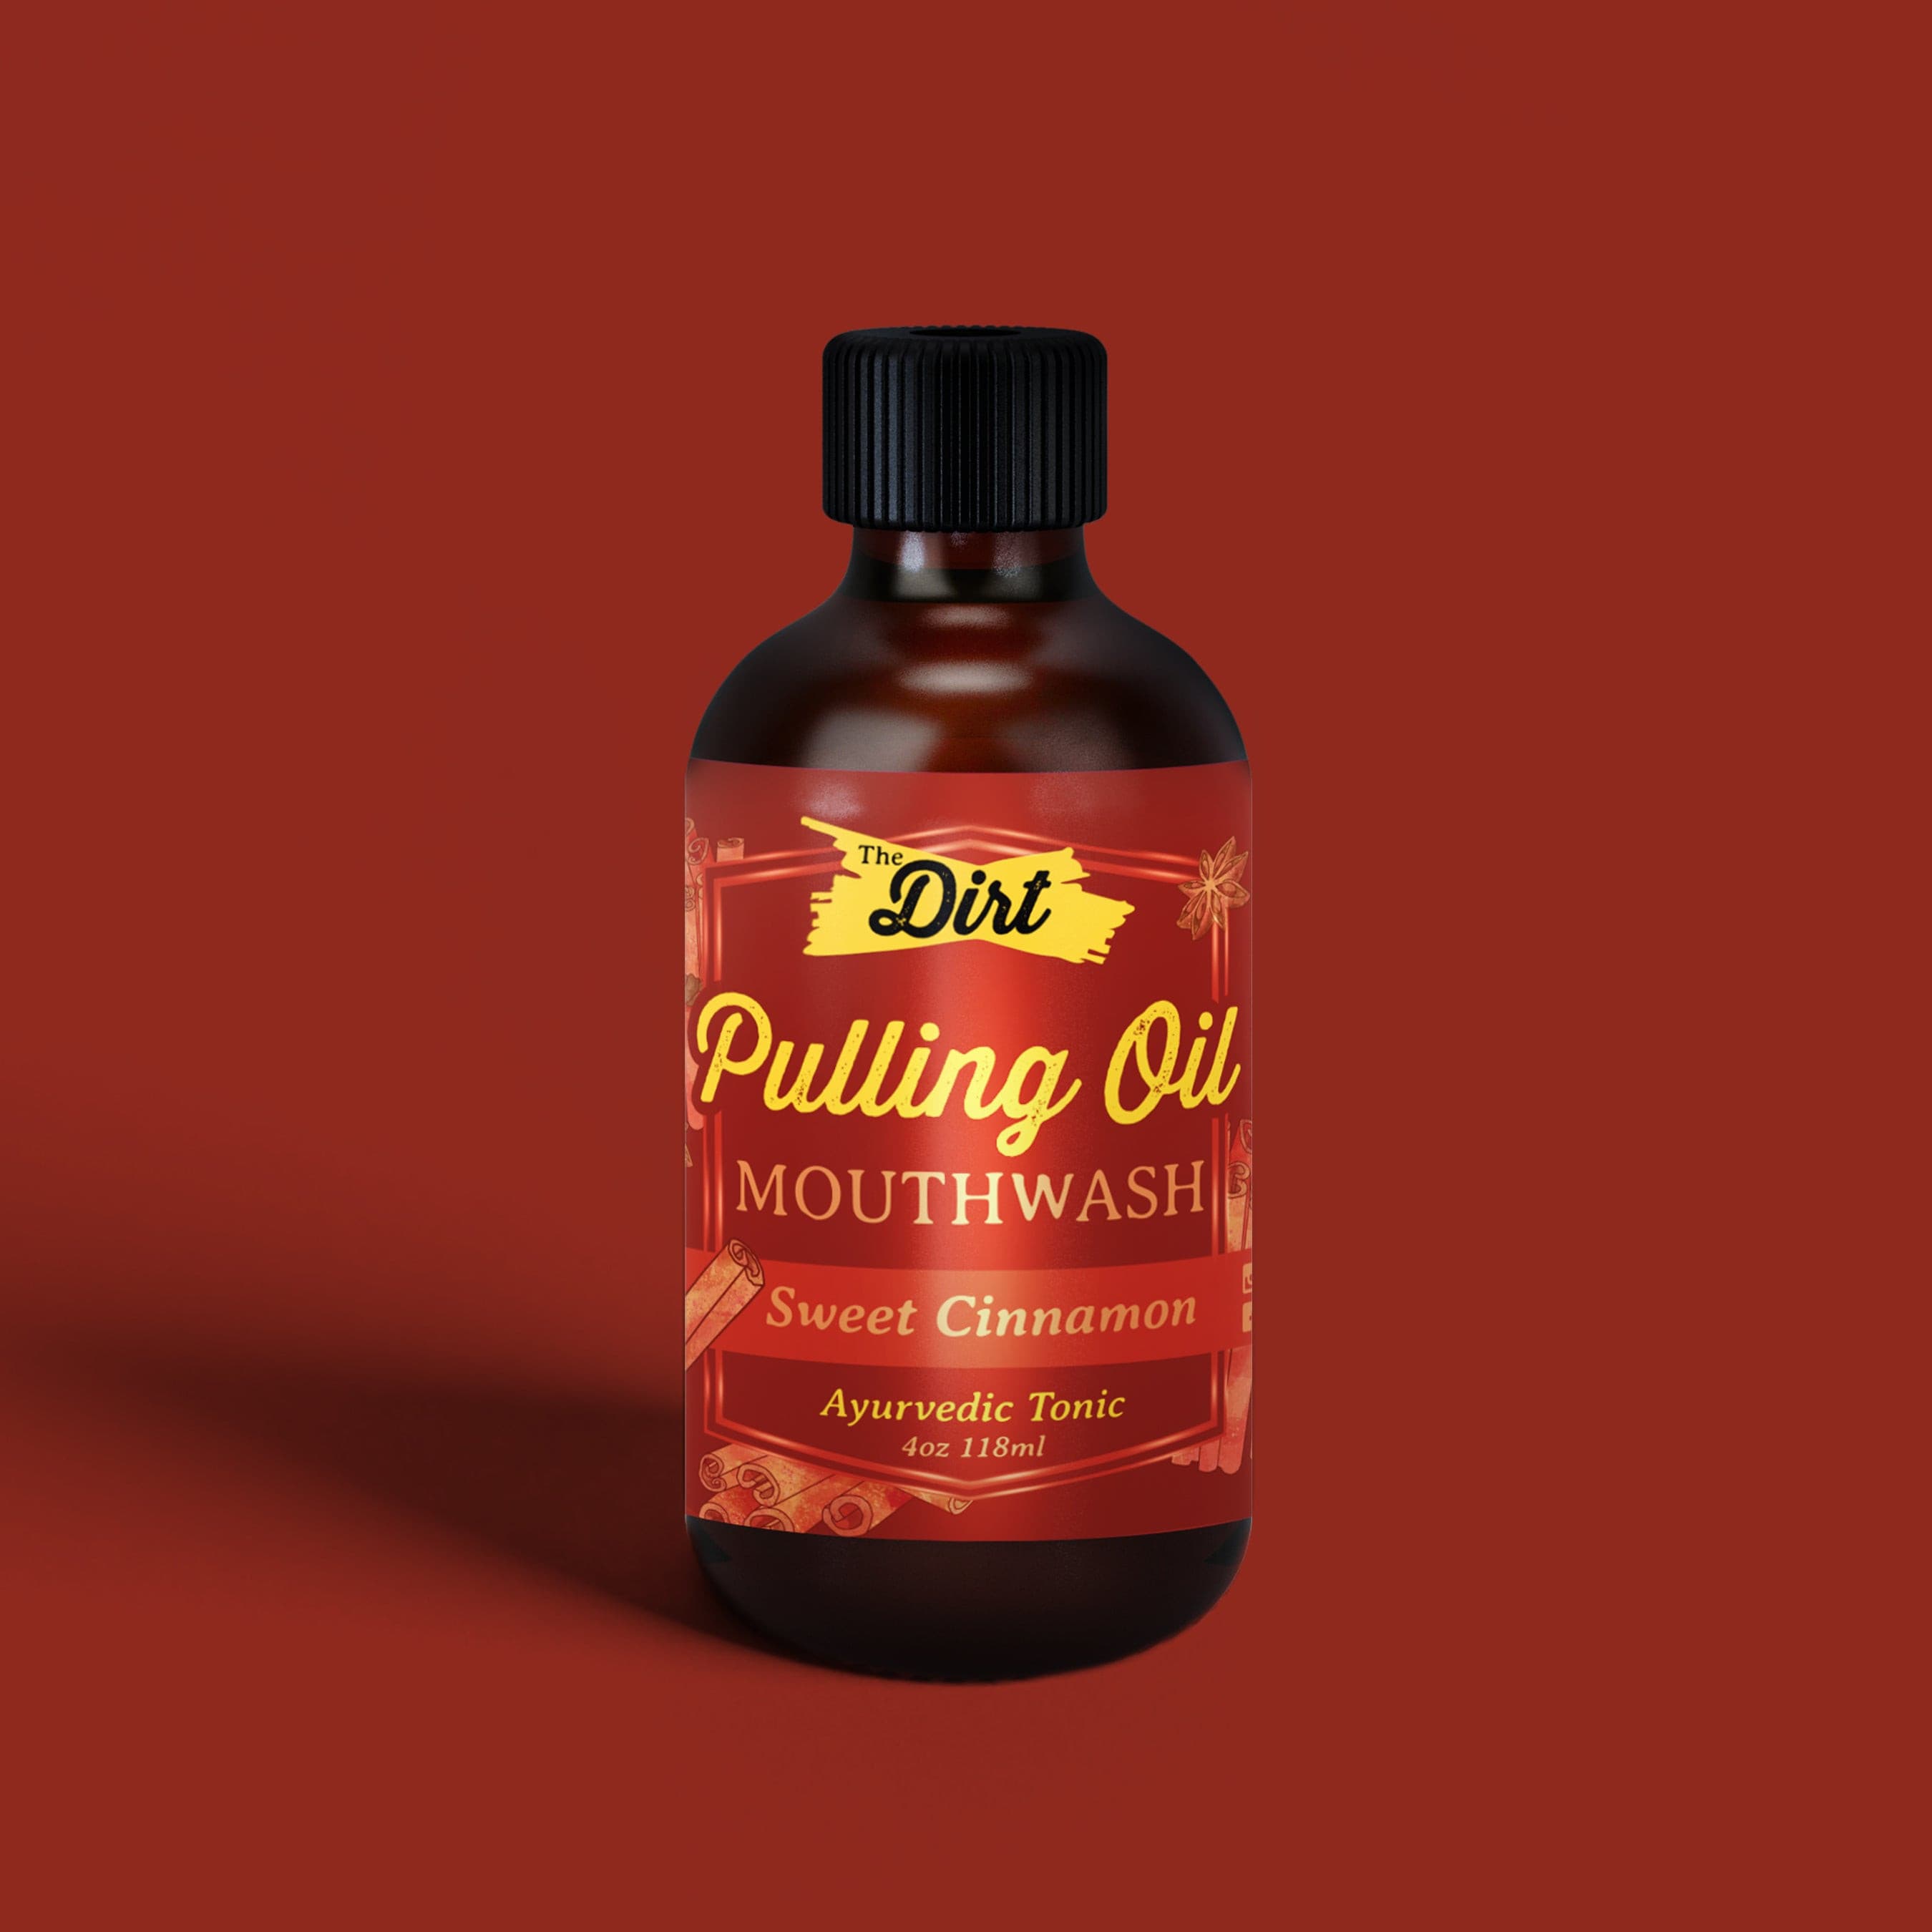 Pulling Oil Mouthwash - The Dirt - Super Natural Oral Care 4oz / Sweet Cinnamon Oral Care